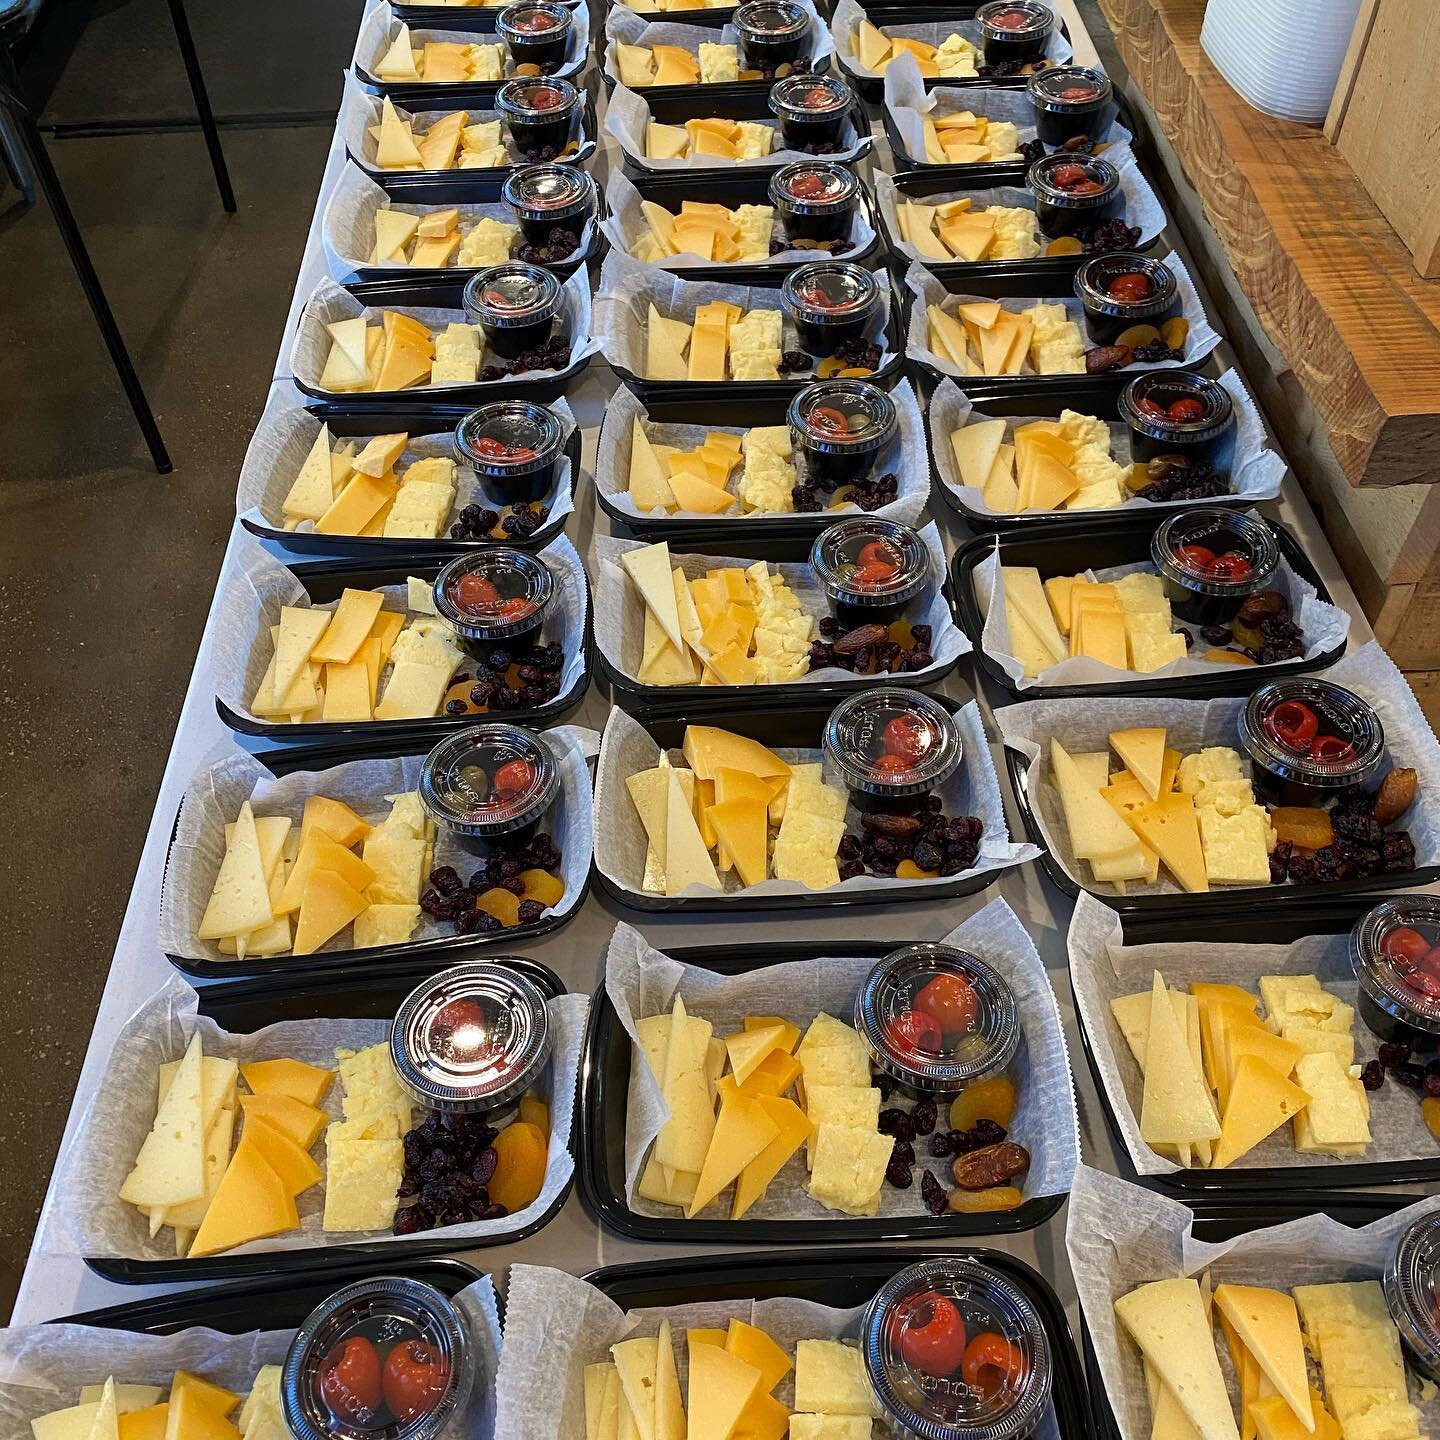 Need Cheese boxes for a special event? We can do that! #cheese #cheesebox #cheesetogo #togo #special #party #winetasting #cheeseandwine #custommade #delivery #winery #cheeselover #goodfood #appetizers #shoplocal #smallbusiness #